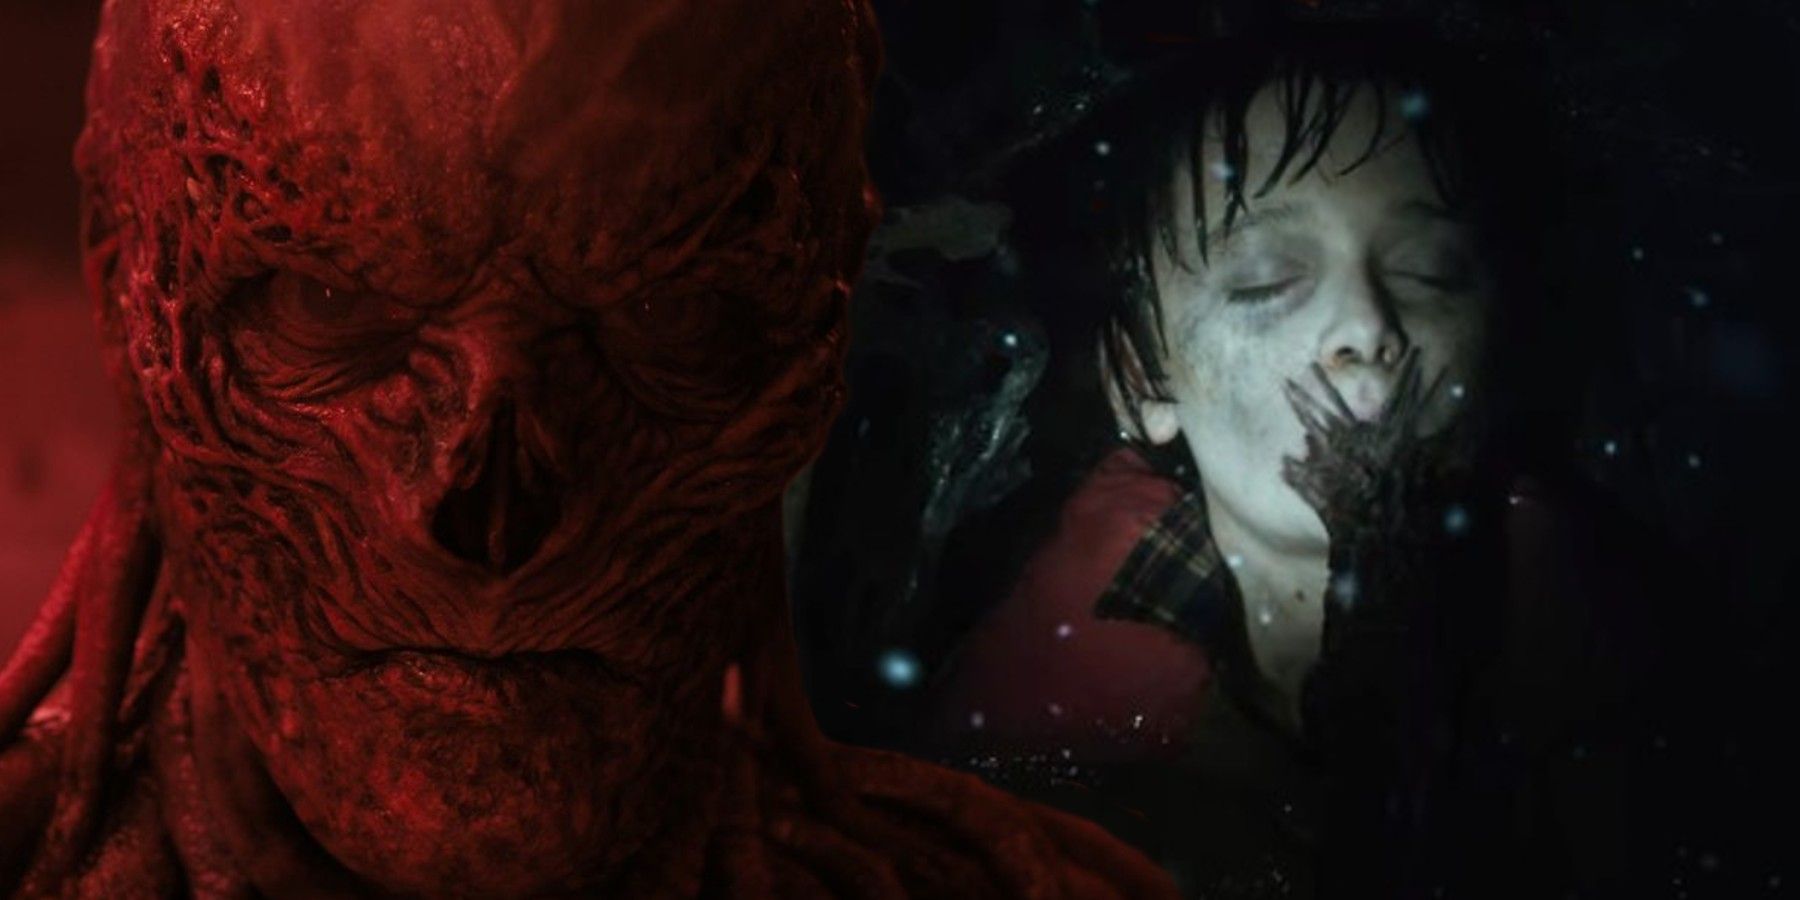 Vecna and Will Byers in the Upside Down in Stranger Things season 1 split image